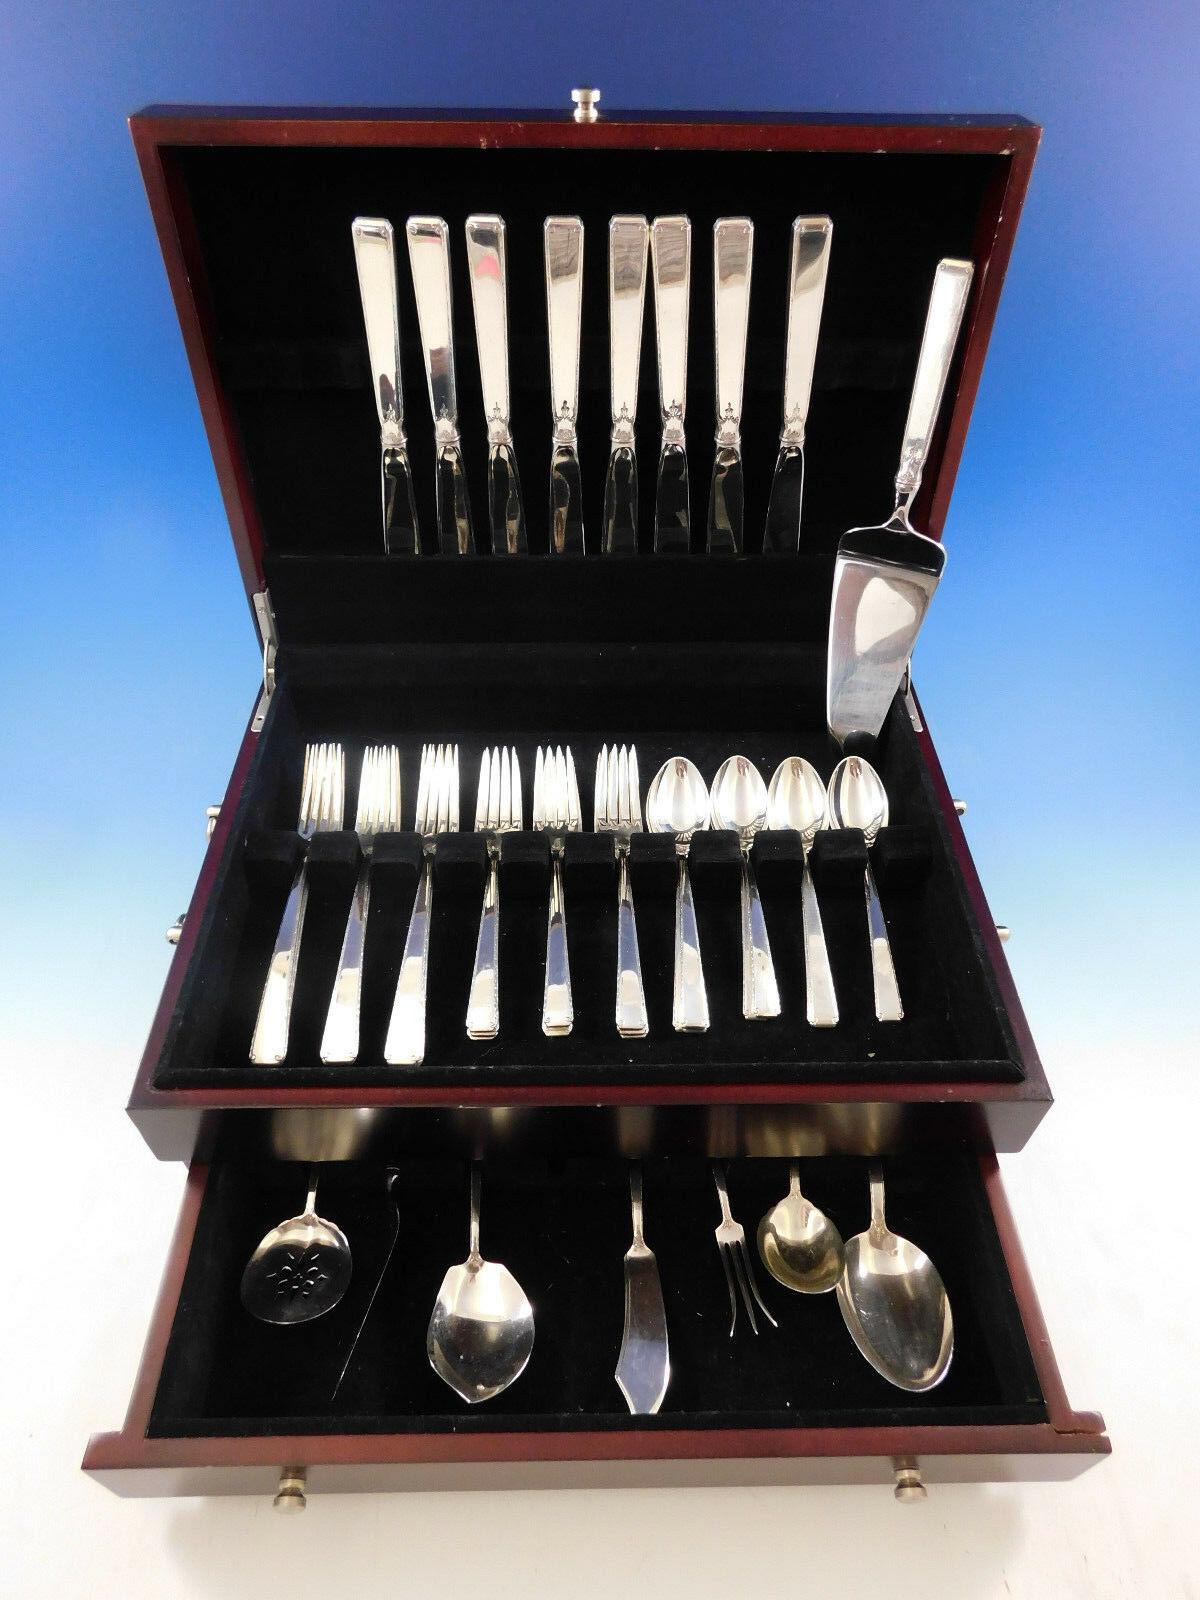 Exquisite old Lace by Towle sterling silver flatware set, 40 pieces. This set includes:

8 knives, 9